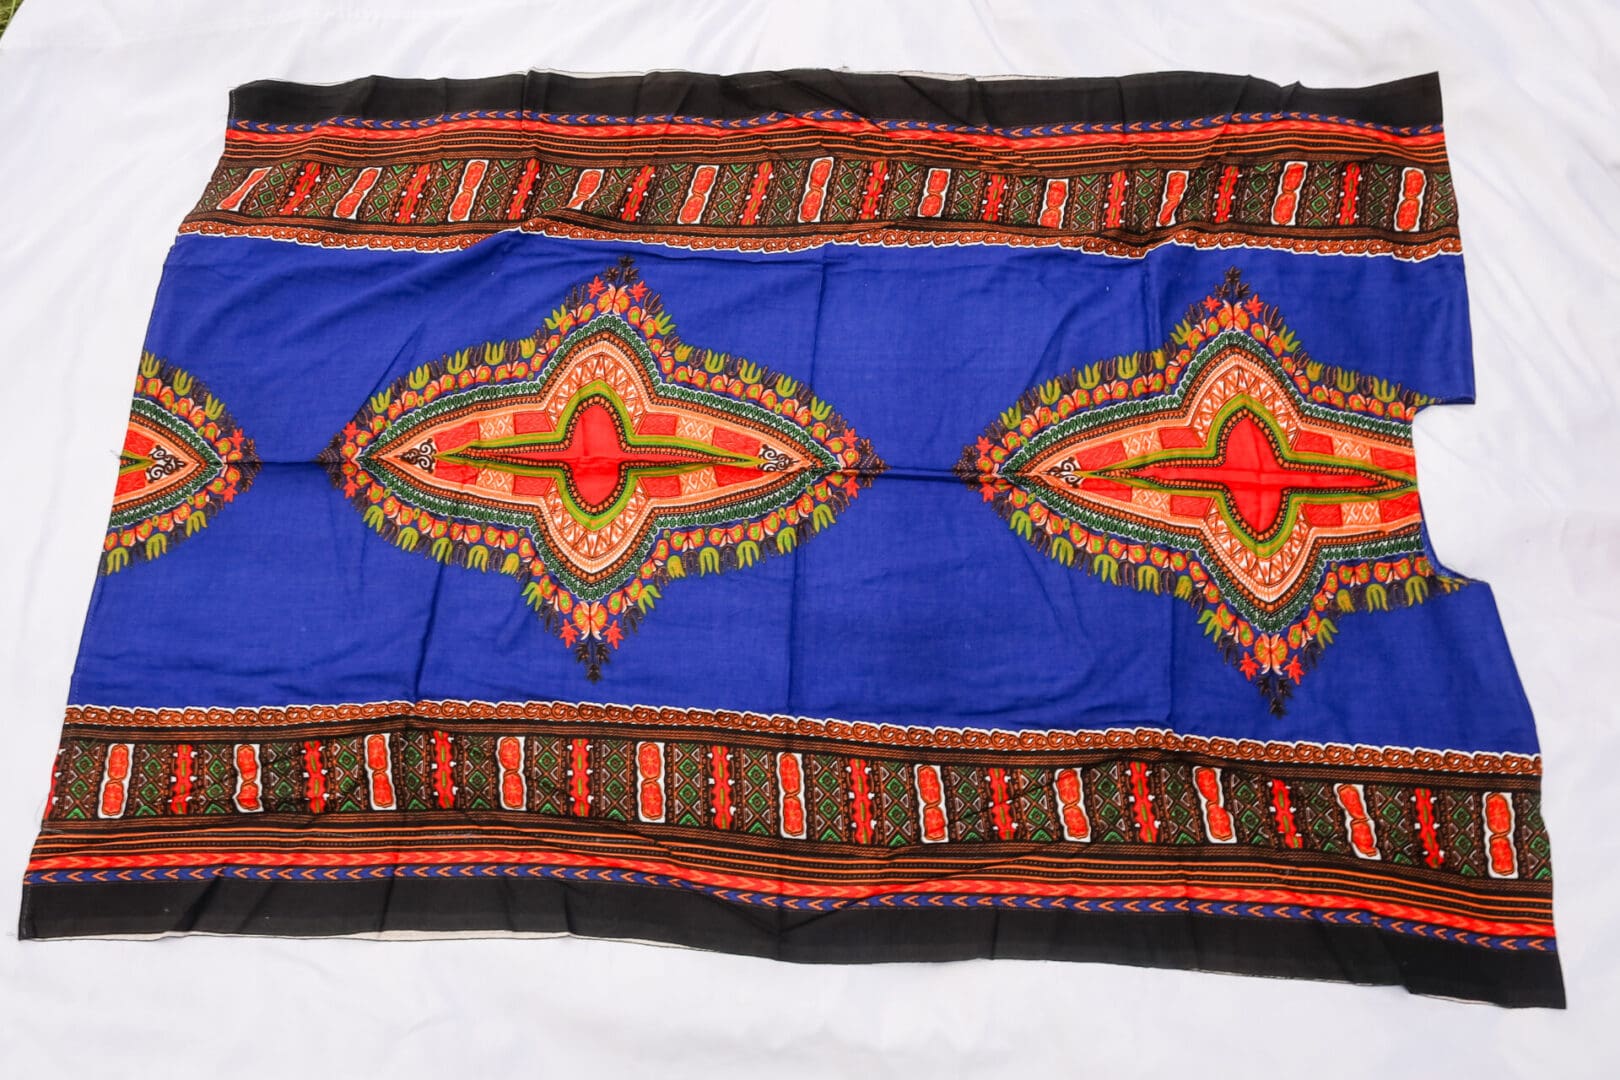 A blue and red blanket with an ornate design.